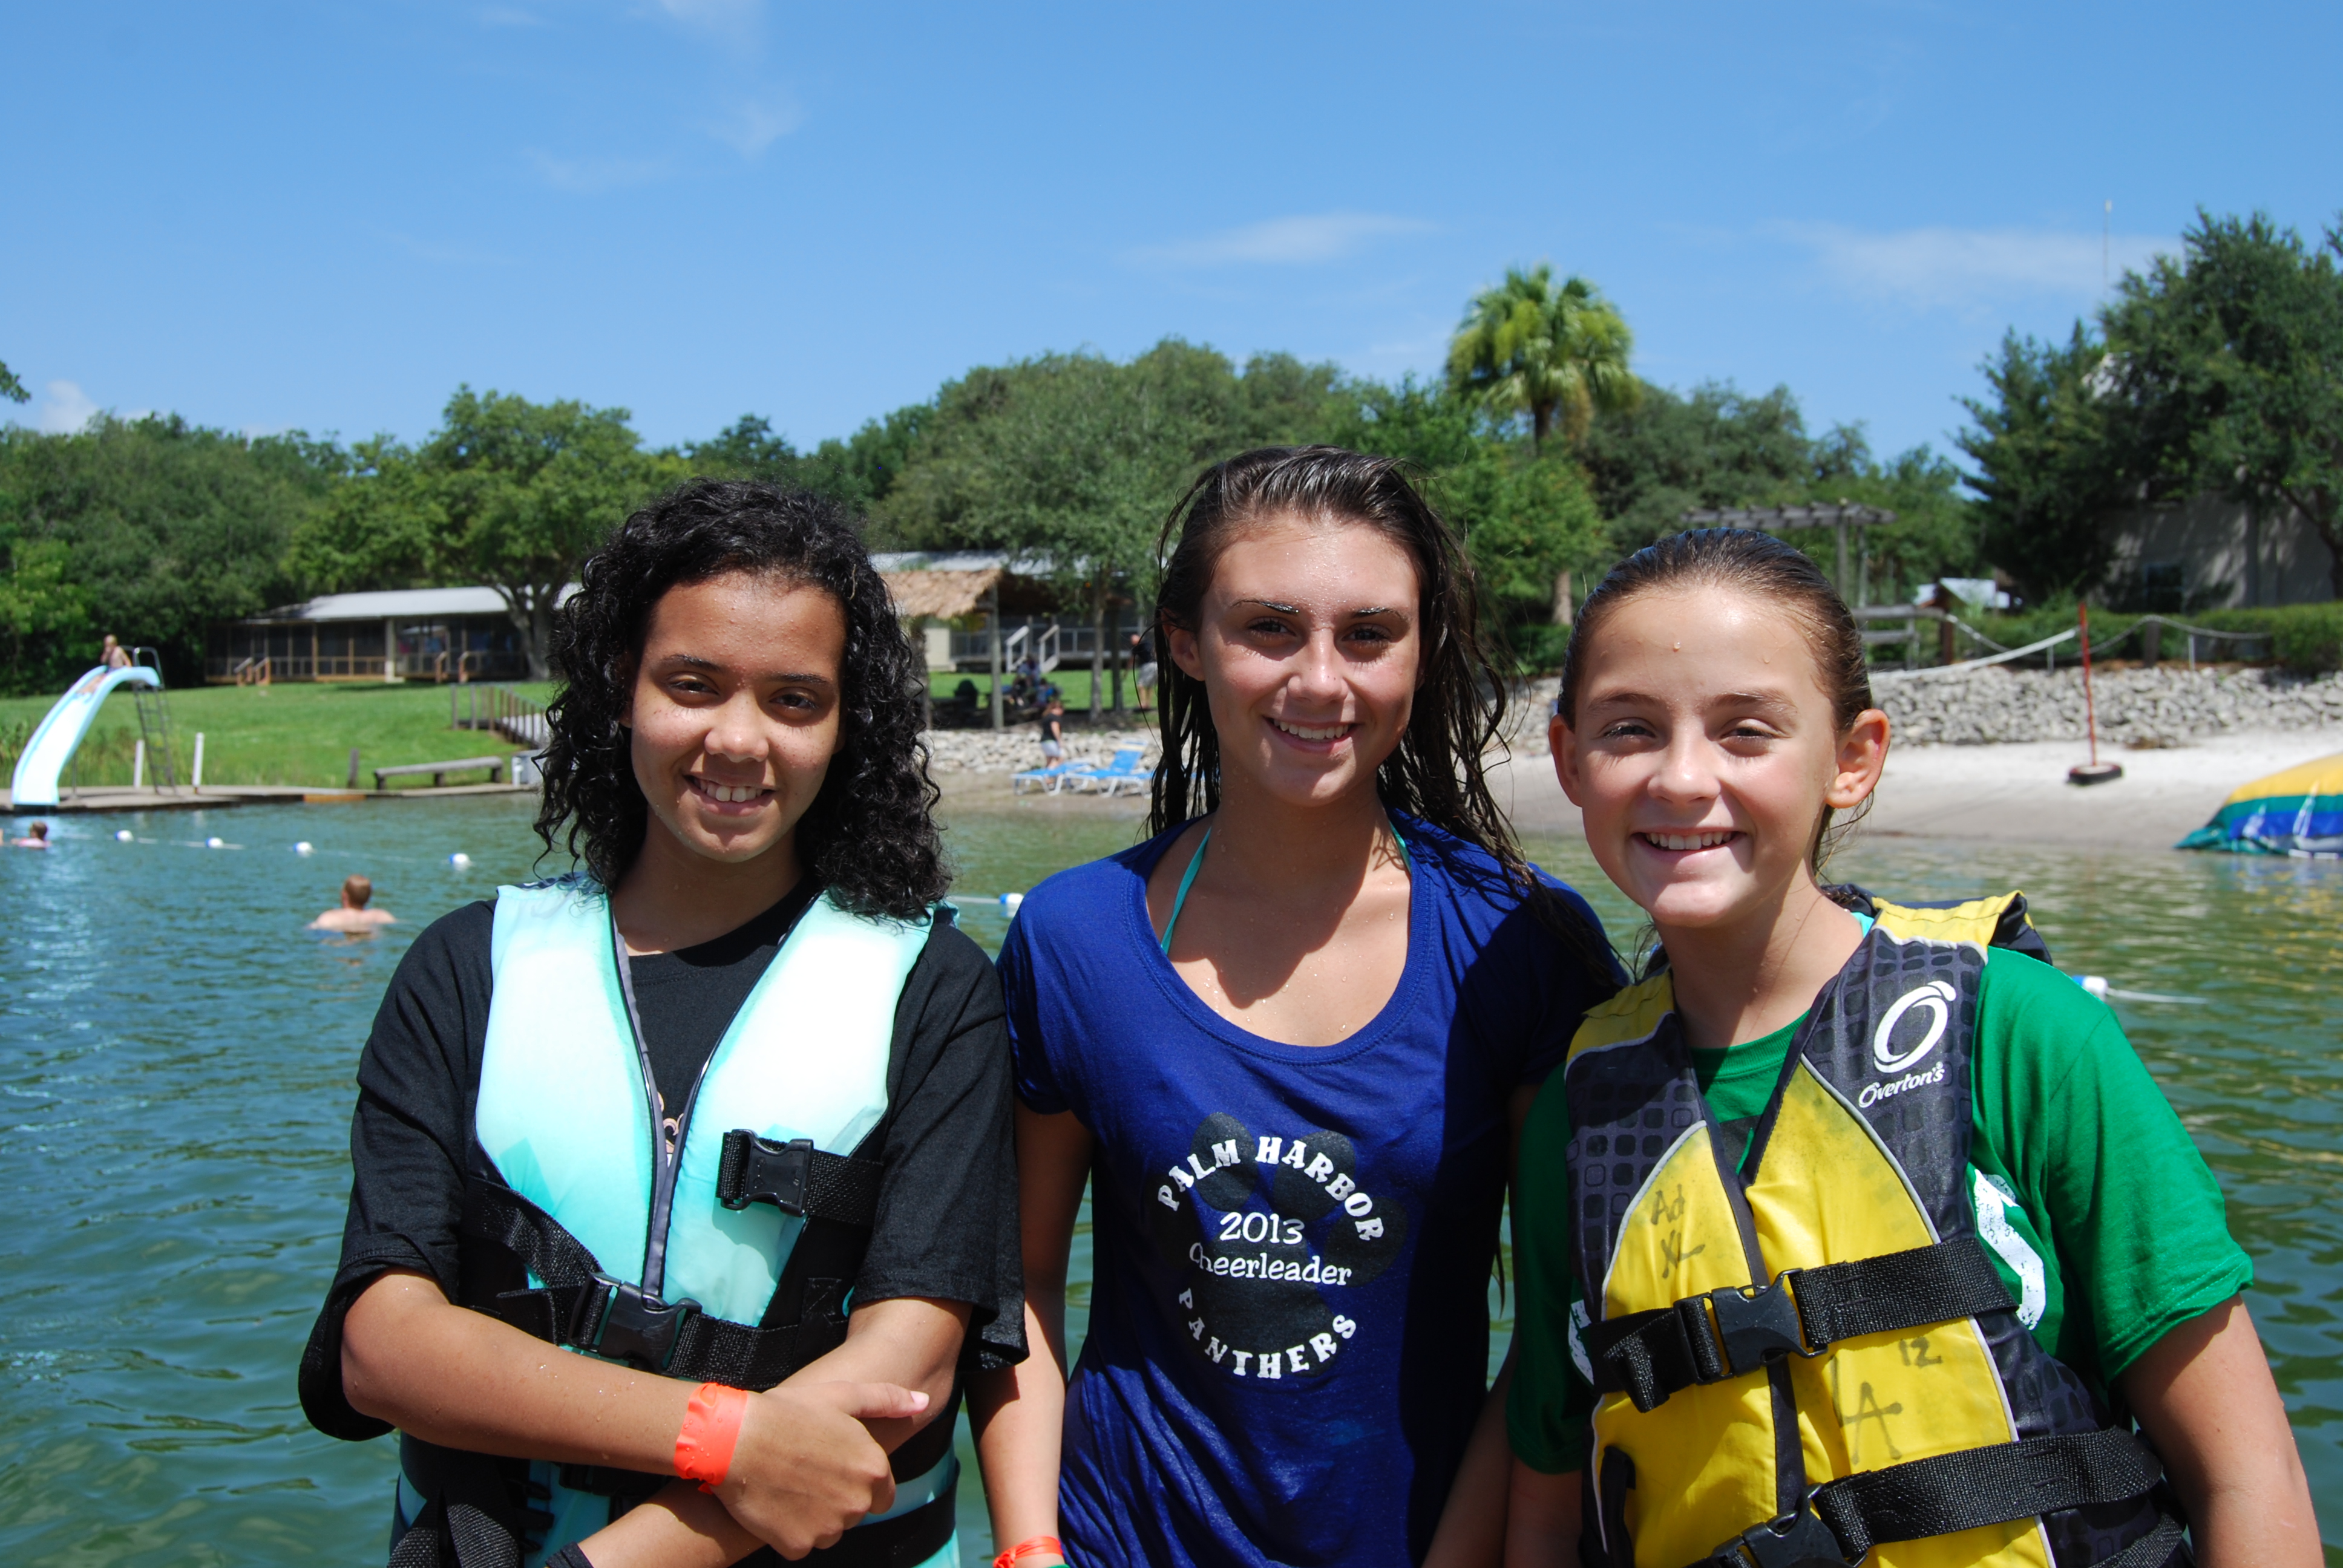 Three girl campers smiling on the lake